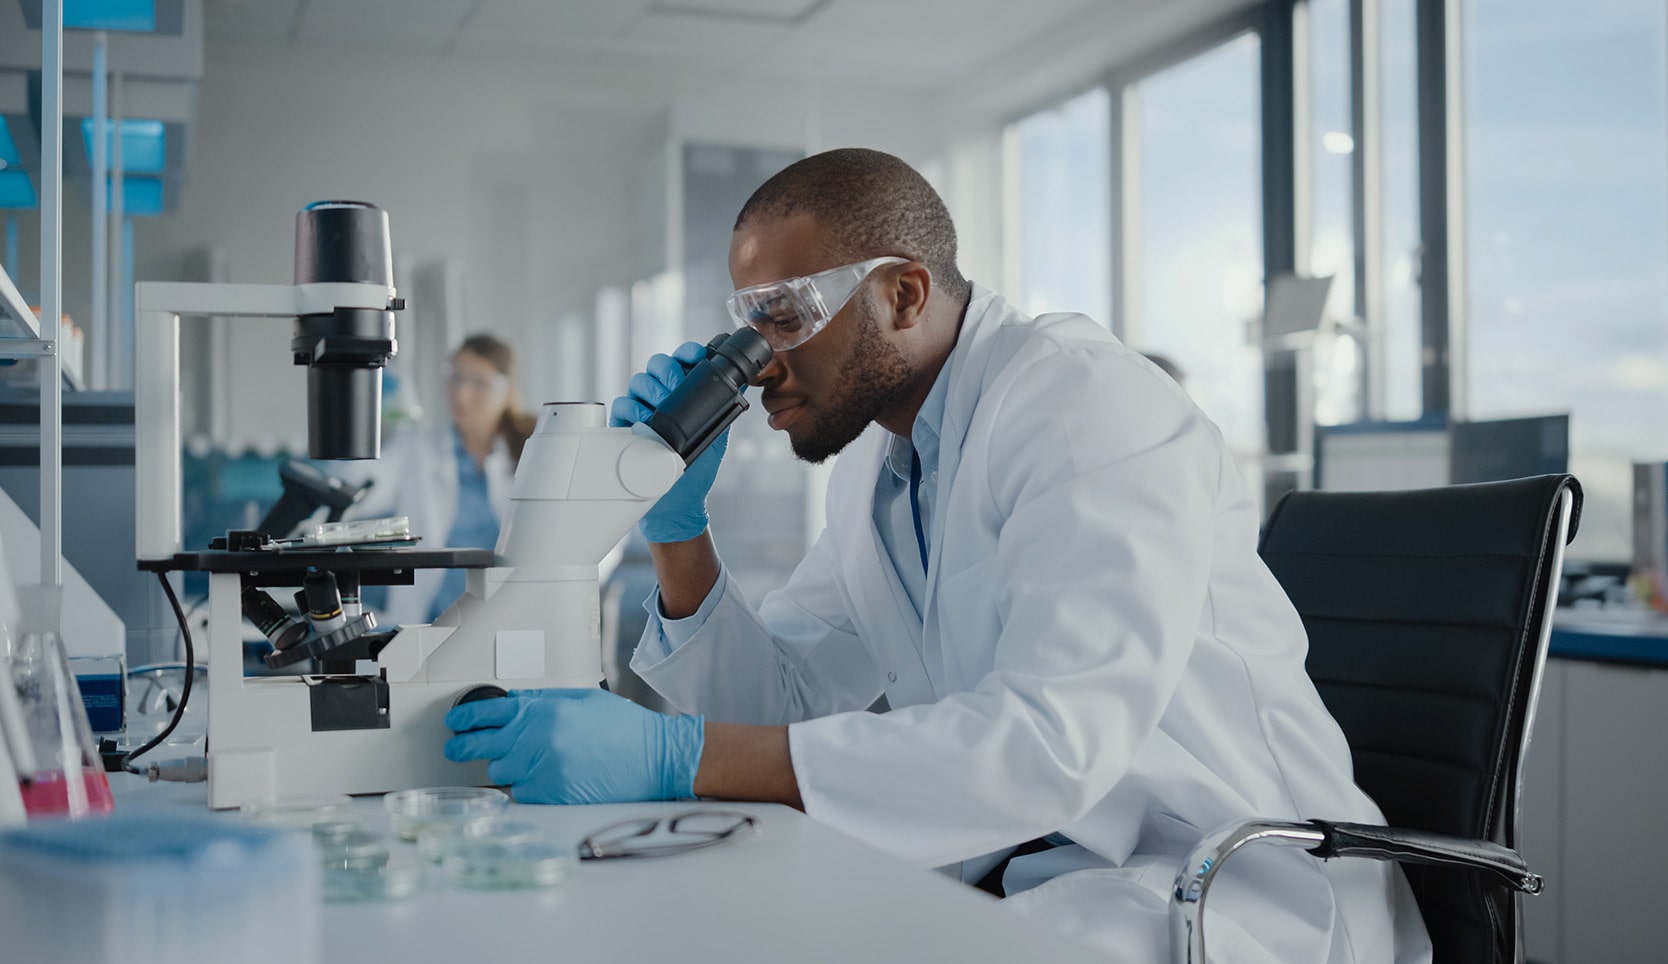 Image of person sitting at a table in a medical laboratory looking into a microscope